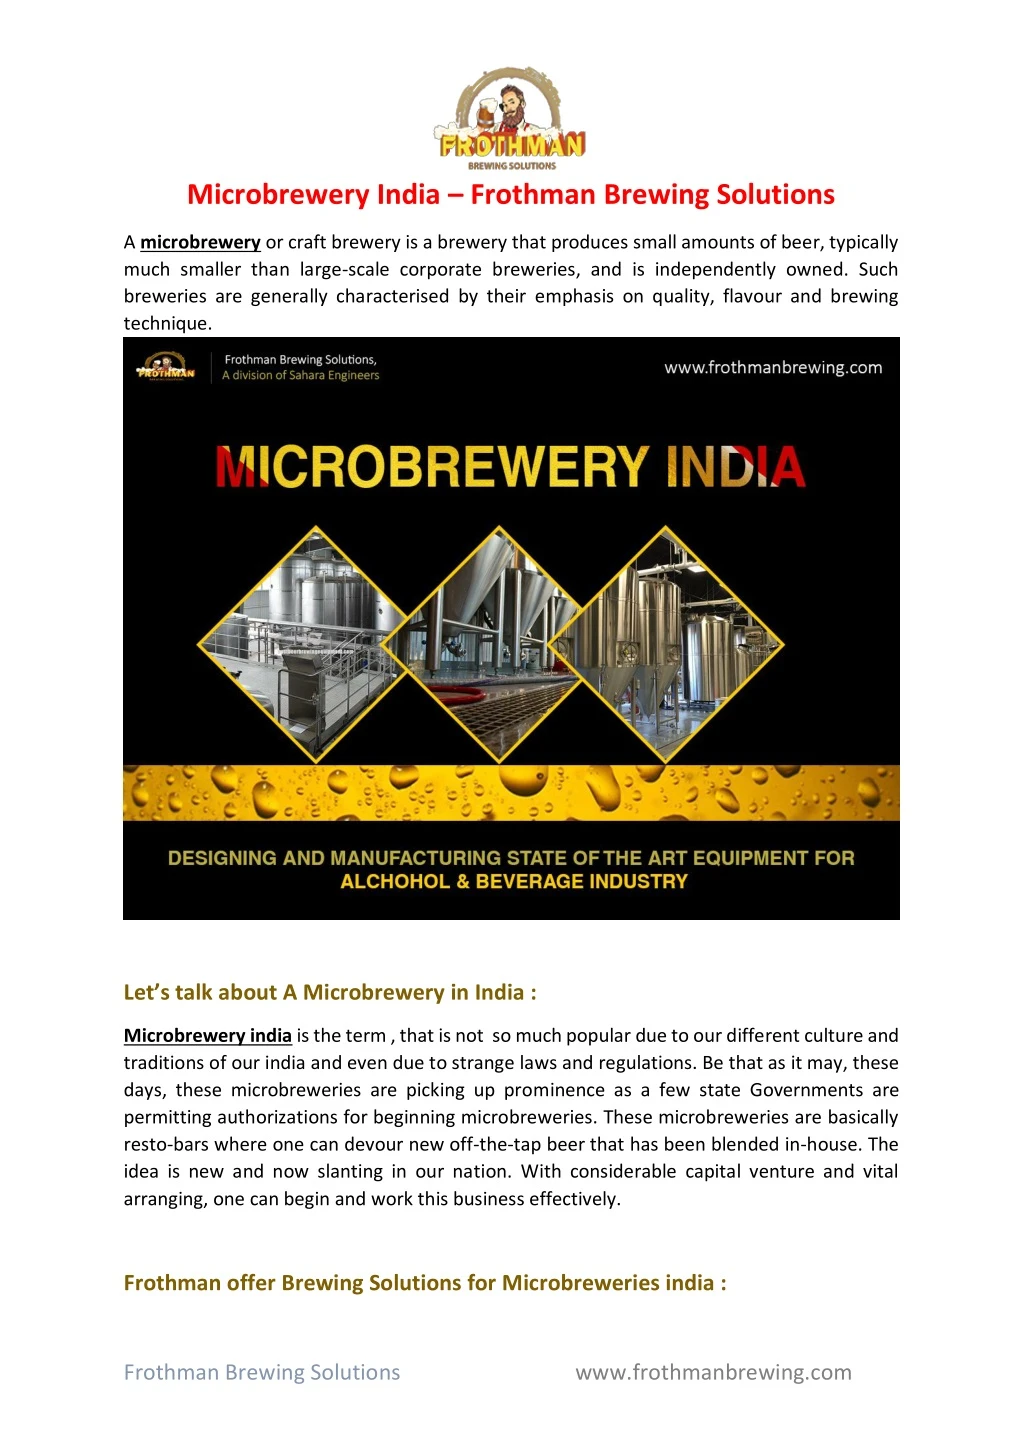 microbrewery india frothman brewing solutions